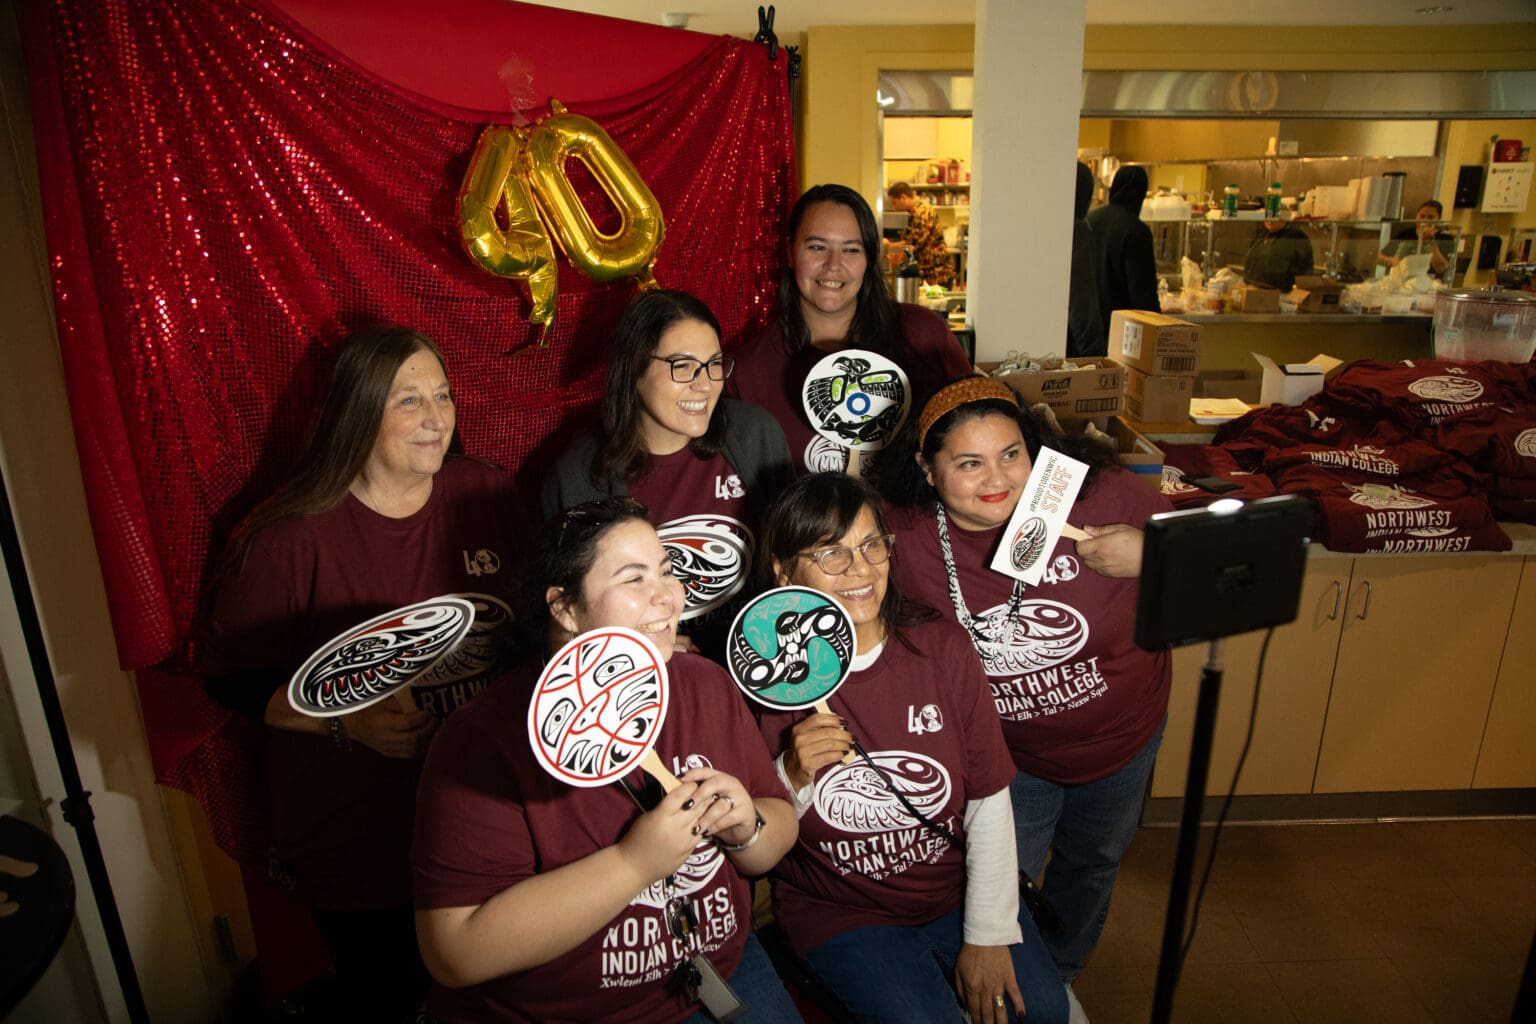 Organizers and volunteers at the Northwest Indian College's 40th anniversary pose for a group photo using the provided props.